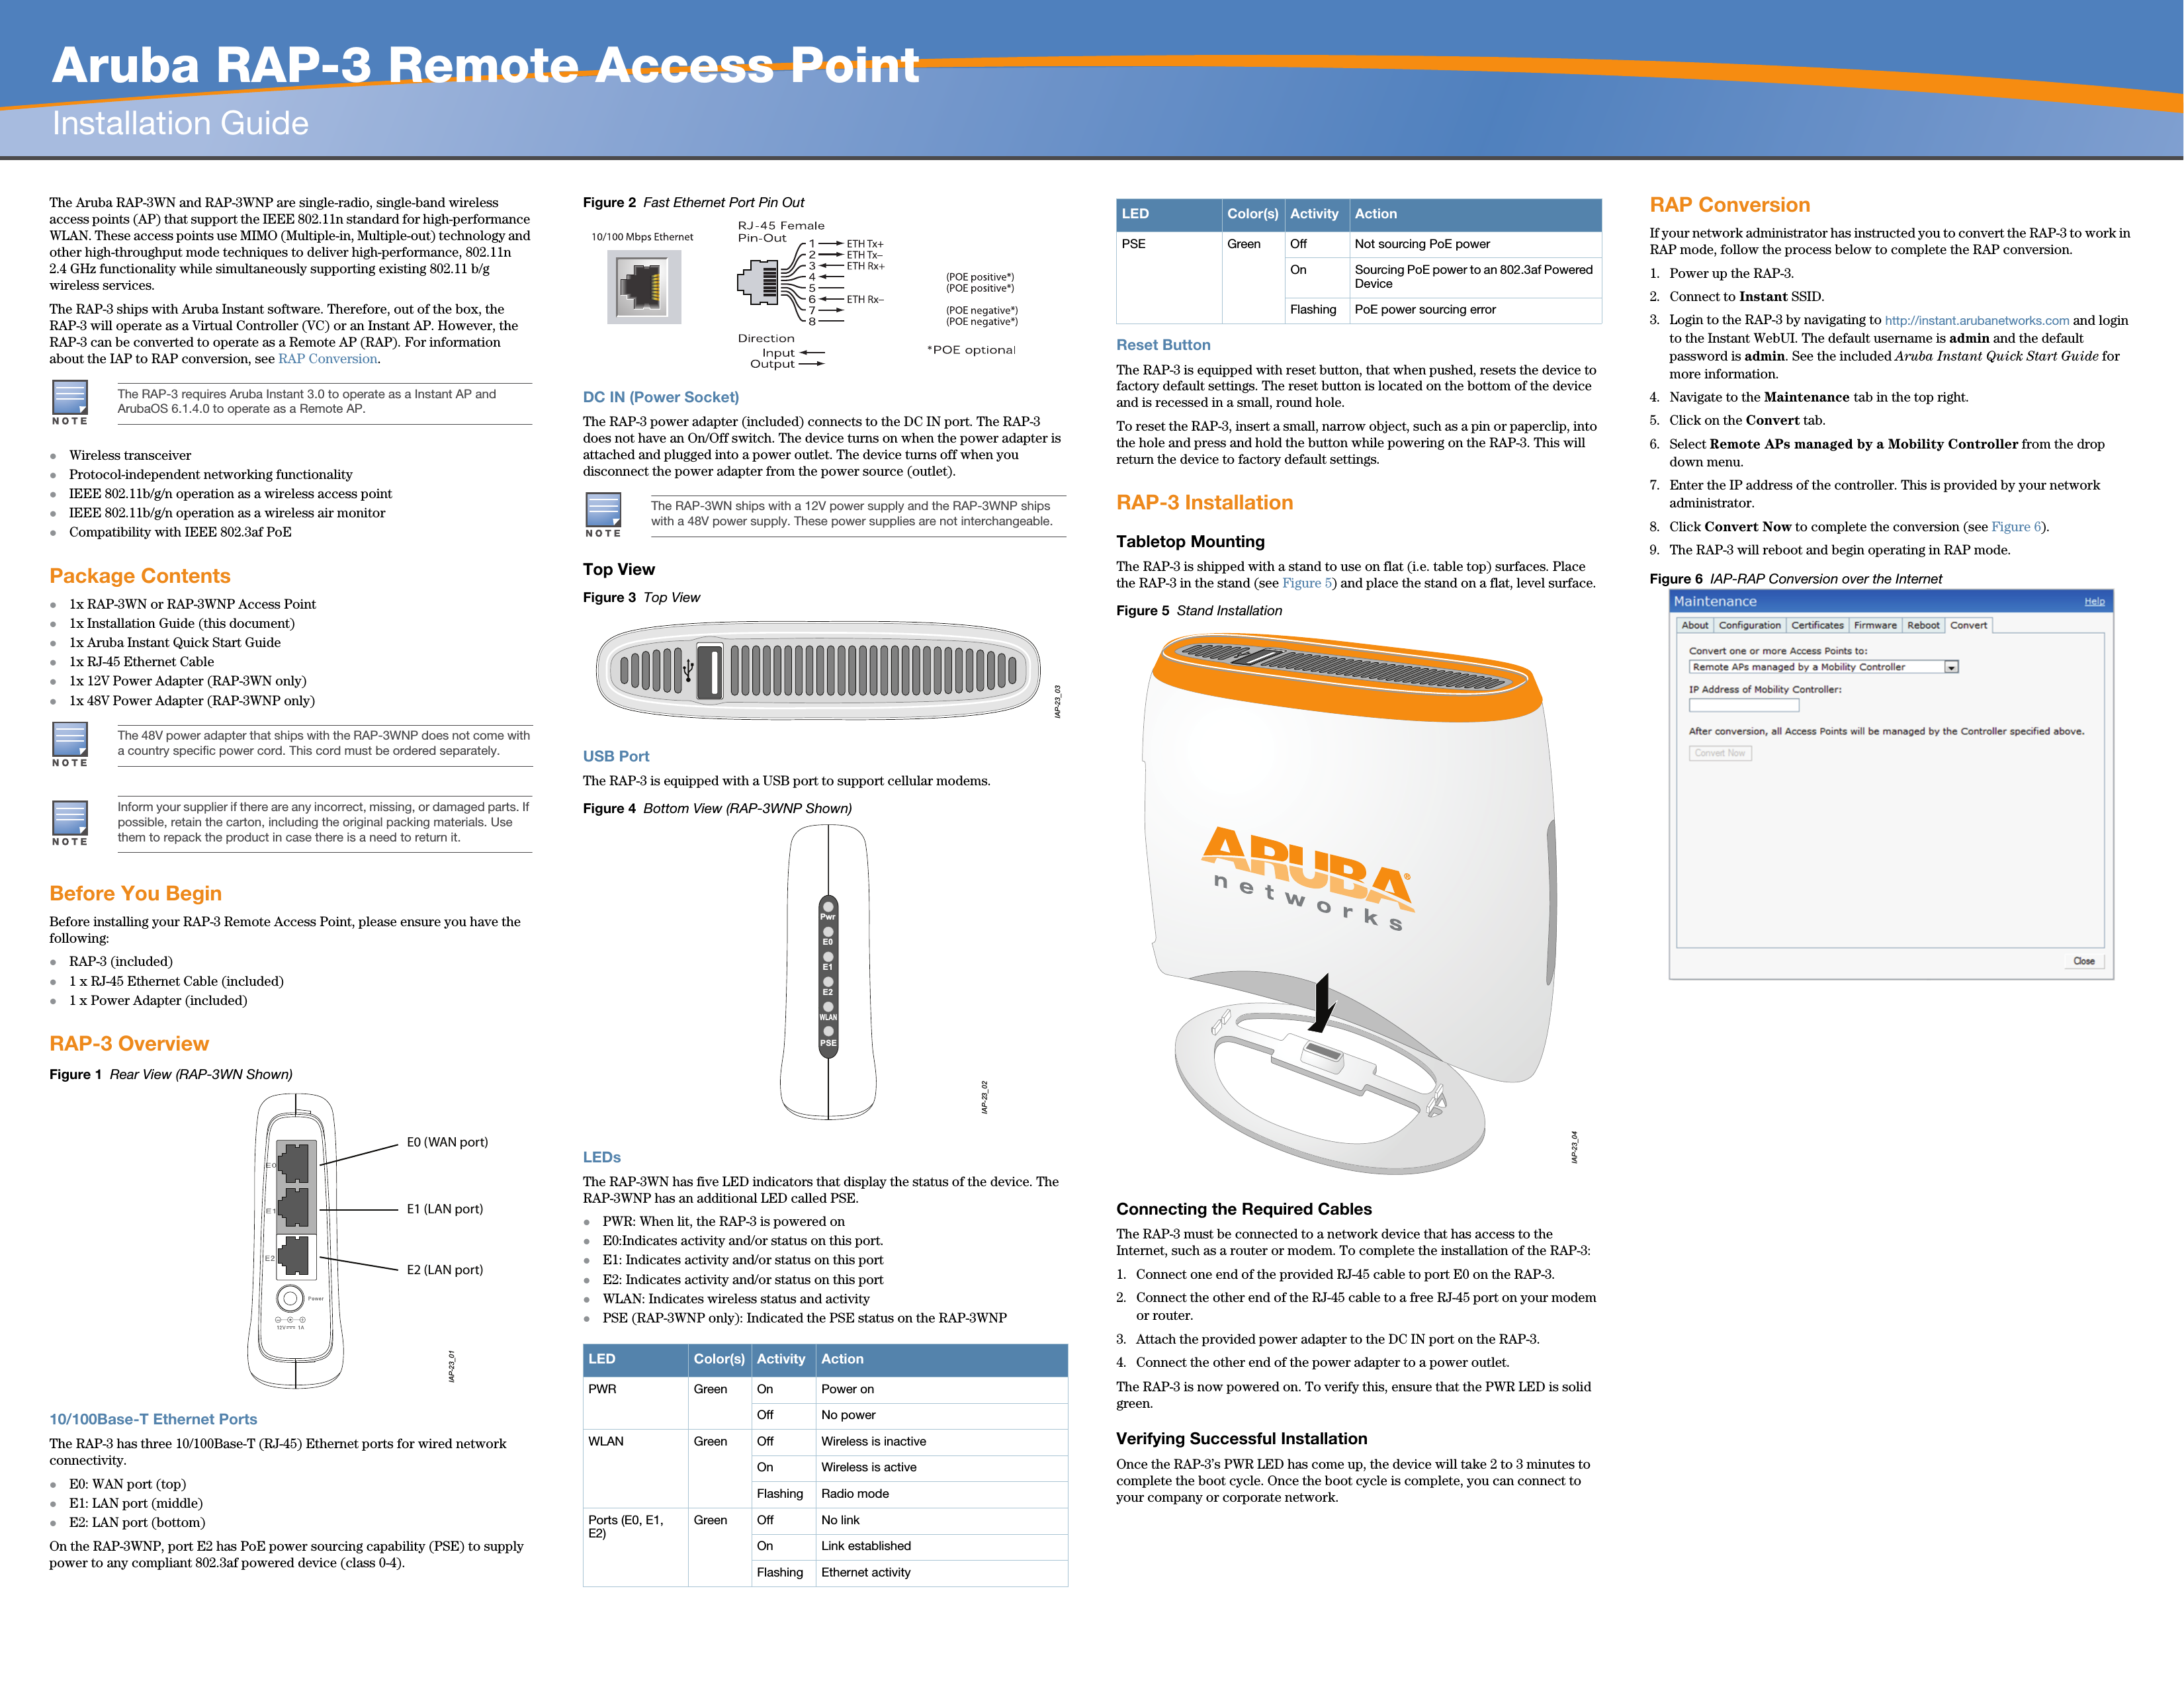   Aruba RAP-3 Remote Access PointInstallation Guide The Aruba RAP-3WN and RAP-3WNP are single-radio, single-band wireless access points (AP) that support the IEEE 802.11n standard for high-performance WLAN. These access points use MIMO (Multiple-in, Multiple-out) technology and other high-throughput mode techniques to deliver high-performance, 802.11n 2.4 GHz functionality while simultaneously supporting existing 802.11 b/g wireless services.The RAP-3 ships with Aruba Instant software. Therefore, out of the box, the RAP-3 will operate as a Virtual Controller (VC) or an Instant AP. However, the RAP-3 can be converted to operate as a Remote AP (RAP). For information about the IAP to RAP conversion, see RAP Conversion.Wireless transceiverProtocol-independent networking functionalityIEEE 802.11b/g/n operation as a wireless access pointIEEE 802.11b/g/n operation as a wireless air monitorCompatibility with IEEE 802.3af PoEPackage Contents1x RAP-3WN or RAP-3WNP Access Point 1x Installation Guide (this document)1x Aruba Instant Quick Start Guide1x RJ-45 Ethernet Cable1x 12V Power Adapter (RAP-3WN only)1x 48V Power Adapter (RAP-3WNP only)Before You BeginBefore installing your RAP-3 Remote Access Point, please ensure you have the following:RAP-3 (included)1 x RJ-45 Ethernet Cable (included)1 x Power Adapter (included)RAP-3 OverviewFigure 1  Rear View (RAP-3WN Shown)10/100Base-T Ethernet PortsThe RAP-3 has three 10/100Base-T (RJ-45) Ethernet ports for wired network connectivity. E0: WAN port (top)E1: LAN port (middle)E2: LAN port (bottom)On the RAP-3WNP, port E2 has PoE power sourcing capability (PSE) to supply power to any compliant 802.3af powered device (class 0-4).Figure 2  Fast Ethernet Port Pin OutDC IN (Power Socket)The RAP-3 power adapter (included) connects to the DC IN port. The RAP-3 does not have an On/Off switch. The device turns on when the power adapter is attached and plugged into a power outlet. The device turns off when you disconnect the power adapter from the power source (outlet).Top ViewFigure 3  Top ViewUSB PortThe RAP-3 is equipped with a USB port to support cellular modems. Figure 4  Bottom View (RAP-3WNP Shown) LEDsThe RAP-3WN has five LED indicators that display the status of the device. The RAP-3WNP has an additional LED called PSE.PWR: When lit, the RAP-3 is powered onE0:Indicates activity and/or status on this port.E1: Indicates activity and/or status on this portE2: Indicates activity and/or status on this portWLAN: Indicates wireless status and activityPSE (RAP-3WNP only): Indicated the PSE status on the RAP-3WNP  Reset ButtonThe RAP-3 is equipped with reset button, that when pushed, resets the device to factory default settings. The reset button is located on the bottom of the device and is recessed in a small, round hole.To reset the RAP-3, insert a small, narrow object, such as a pin or paperclip, into the hole and press and hold the button while powering on the RAP-3. This will return the device to factory default settings.RAP-3 InstallationTabletop MountingThe RAP-3 is shipped with a stand to use on flat (i.e. table top) surfaces. Place the RAP-3 in the stand (see Figure 5) and place the stand on a flat, level surface. Figure 5  Stand Installation Connecting the Required CablesThe RAP-3 must be connected to a network device that has access to the Internet, such as a router or modem. To complete the installation of the RAP-3:1. Connect one end of the provided RJ-45 cable to port E0 on the RAP-3.2. Connect the other end of the RJ-45 cable to a free RJ-45 port on your modem or router. 3. Attach the provided power adapter to the DC IN port on the RAP-3.4. Connect the other end of the power adapter to a power outlet.The RAP-3 is now powered on. To verify this, ensure that the PWR LED is solid green. Verifying Successful InstallationOnce the RAP-3’s PWR LED has come up, the device will take 2 to 3 minutes to complete the boot cycle. Once the boot cycle is complete, you can connect to your company or corporate network.RAP ConversionIf your network administrator has instructed you to convert the RAP-3 to work in RAP mode, follow the process below to complete the RAP conversion. 1. Power up the RAP-3.2. Connect to Instant SSID.3. Login to the RAP-3 by navigating to http://instant.arubanetworks.com and login to the Instant WebUI. The default username is admin and the default password is admin. See the included Aruba Instant Quick Start Guide for more information.4. Navigate to the Maintenance tab in the top right.5. Click on the Convert tab.6. Select Remote APs managed by a Mobility Controller from the drop down menu.7. Enter the IP address of the controller. This is provided by your network administrator.8. Click Convert Now to complete the conversion (see Figure 6).9. The RAP-3 will reboot and begin operating in RAP mode.Figure 6  IAP-RAP Conversion over the InternetThe RAP-3 requires Aruba Instant 3.0 to operate as a Instant AP and ArubaOS 6.1.4.0 to operate as a Remote AP.The 48V power adapter that ships with the RAP-3WNP does not come with a country specific power cord. This cord must be ordered separately.Inform your supplier if there are any incorrect, missing, or damaged parts. If possible, retain the carton, including the original packing materials. Use them to repack the product in case there is a need to return it.IAP-23_01E0 (WAN port)E1 (LAN port)E2 (LAN port)The RAP-3WN ships with a 12V power supply and the RAP-3WNP ships with a 48V power supply. These power supplies are not interchangeable.LED Color(s) Activity ActionPWR Green On Power onOff No powerWLAN Green Off Wireless is inactiveOn Wireless is activeFlashing Radio modePorts (E0, E1, E2) Green Off No linkOn Link establishedFlashing Ethernet activityIAP-23_03IAP-23_02PwrE0E1E2WLANPSEPSE Green Off Not sourcing PoE powerOn Sourcing PoE power to an 802.3af Powered DeviceFlashing PoE power sourcing errorLED Color(s) Activity ActionIAP-23_04